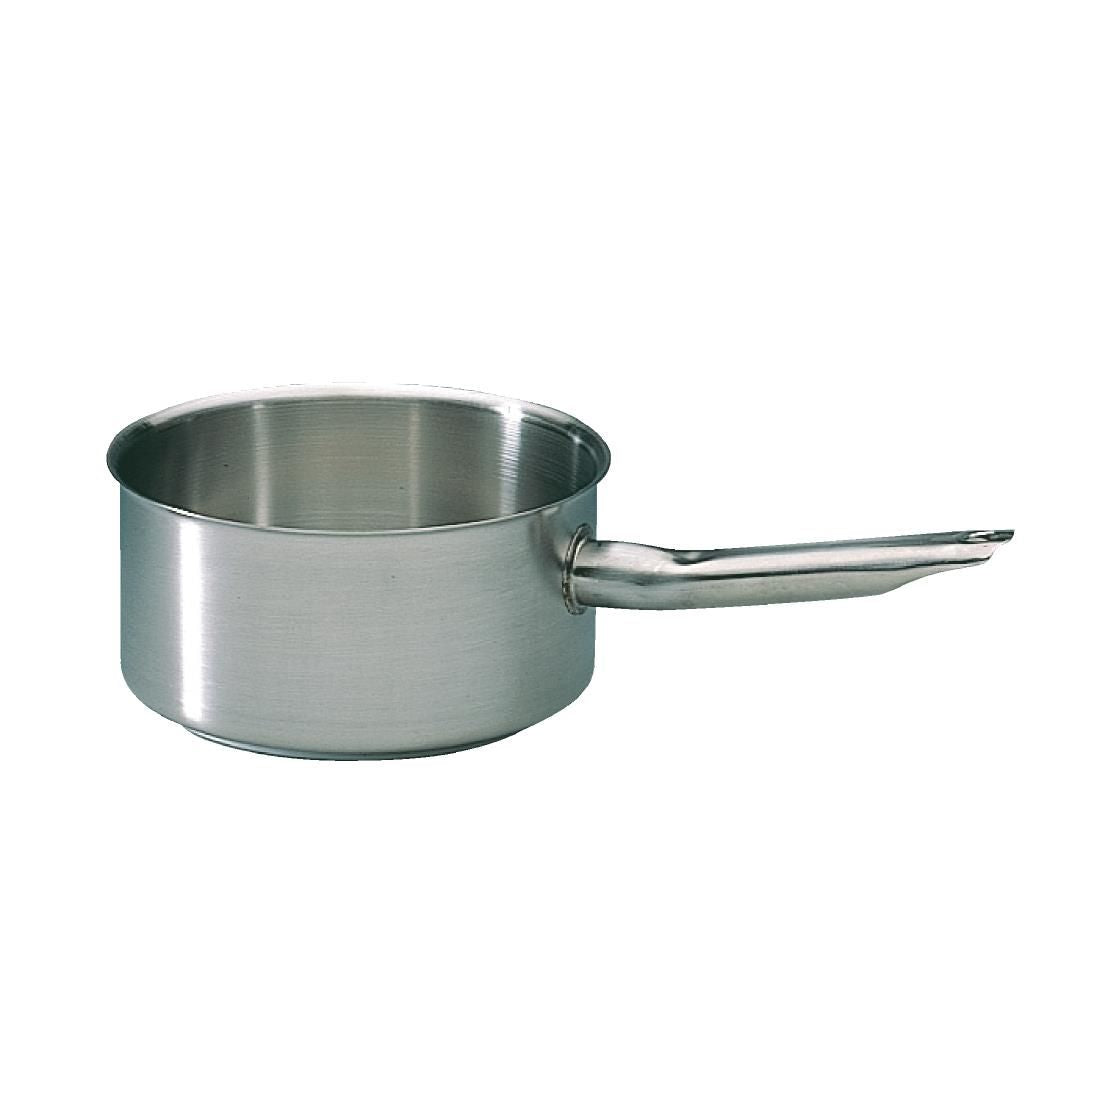 Bourgeat Stainless Steel Excellence Saucepan 5.4Ltr JD Catering Equipment Solutions Ltd